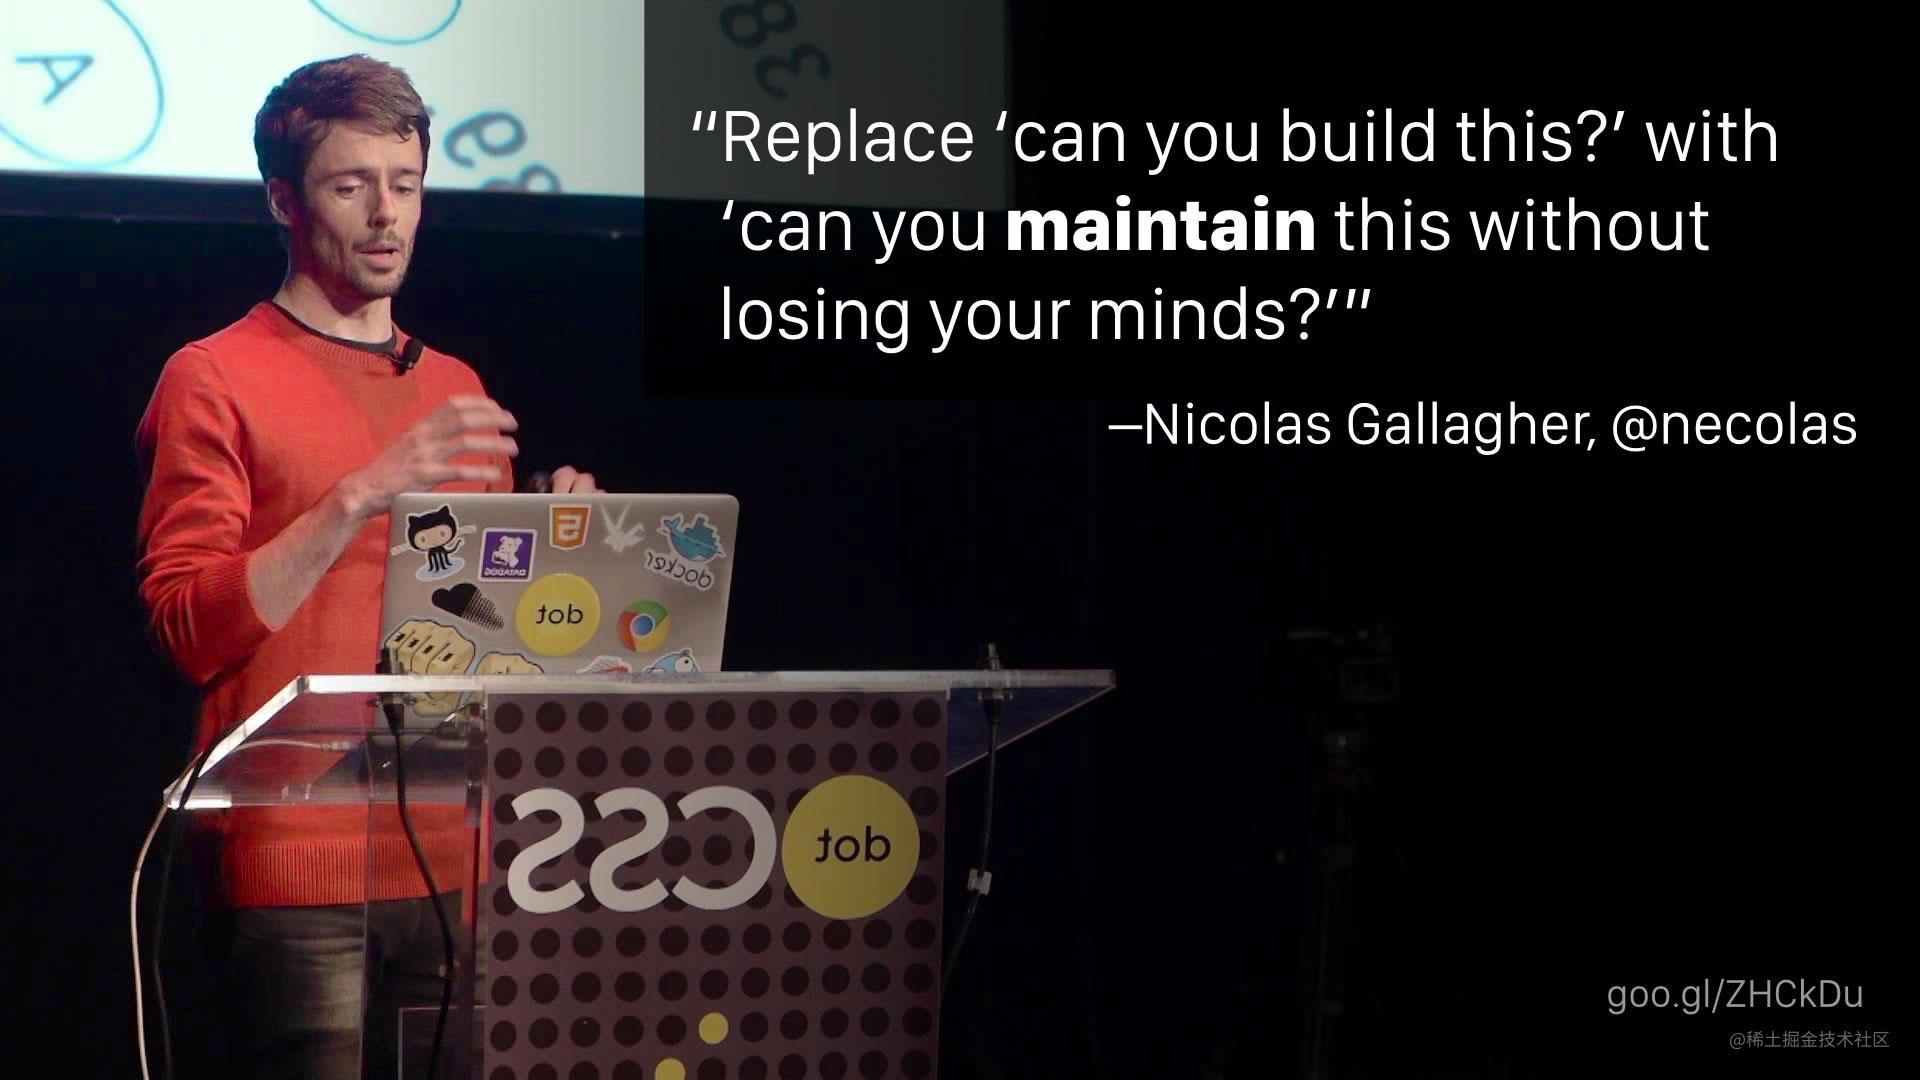 “Replace ‘can you build this?’ with ‘can you maintain this without losing your minds?’” —Nicolas Gallagher